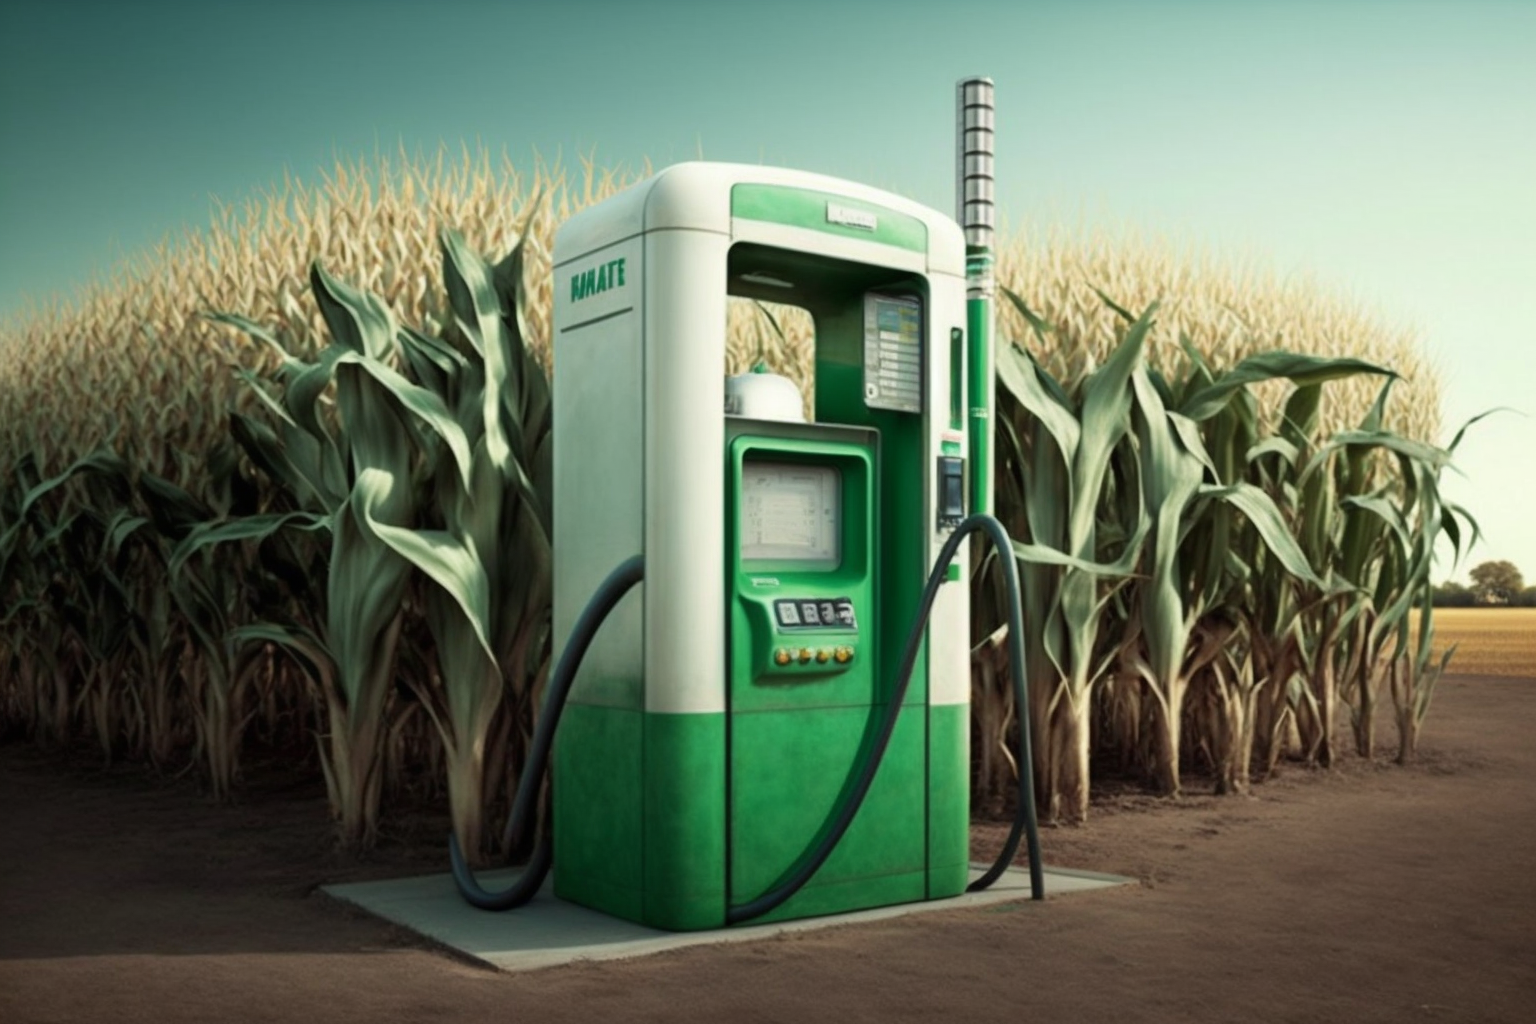 MicroBite - Revolutionizing the Biofuel Industry with GammaBox Technology